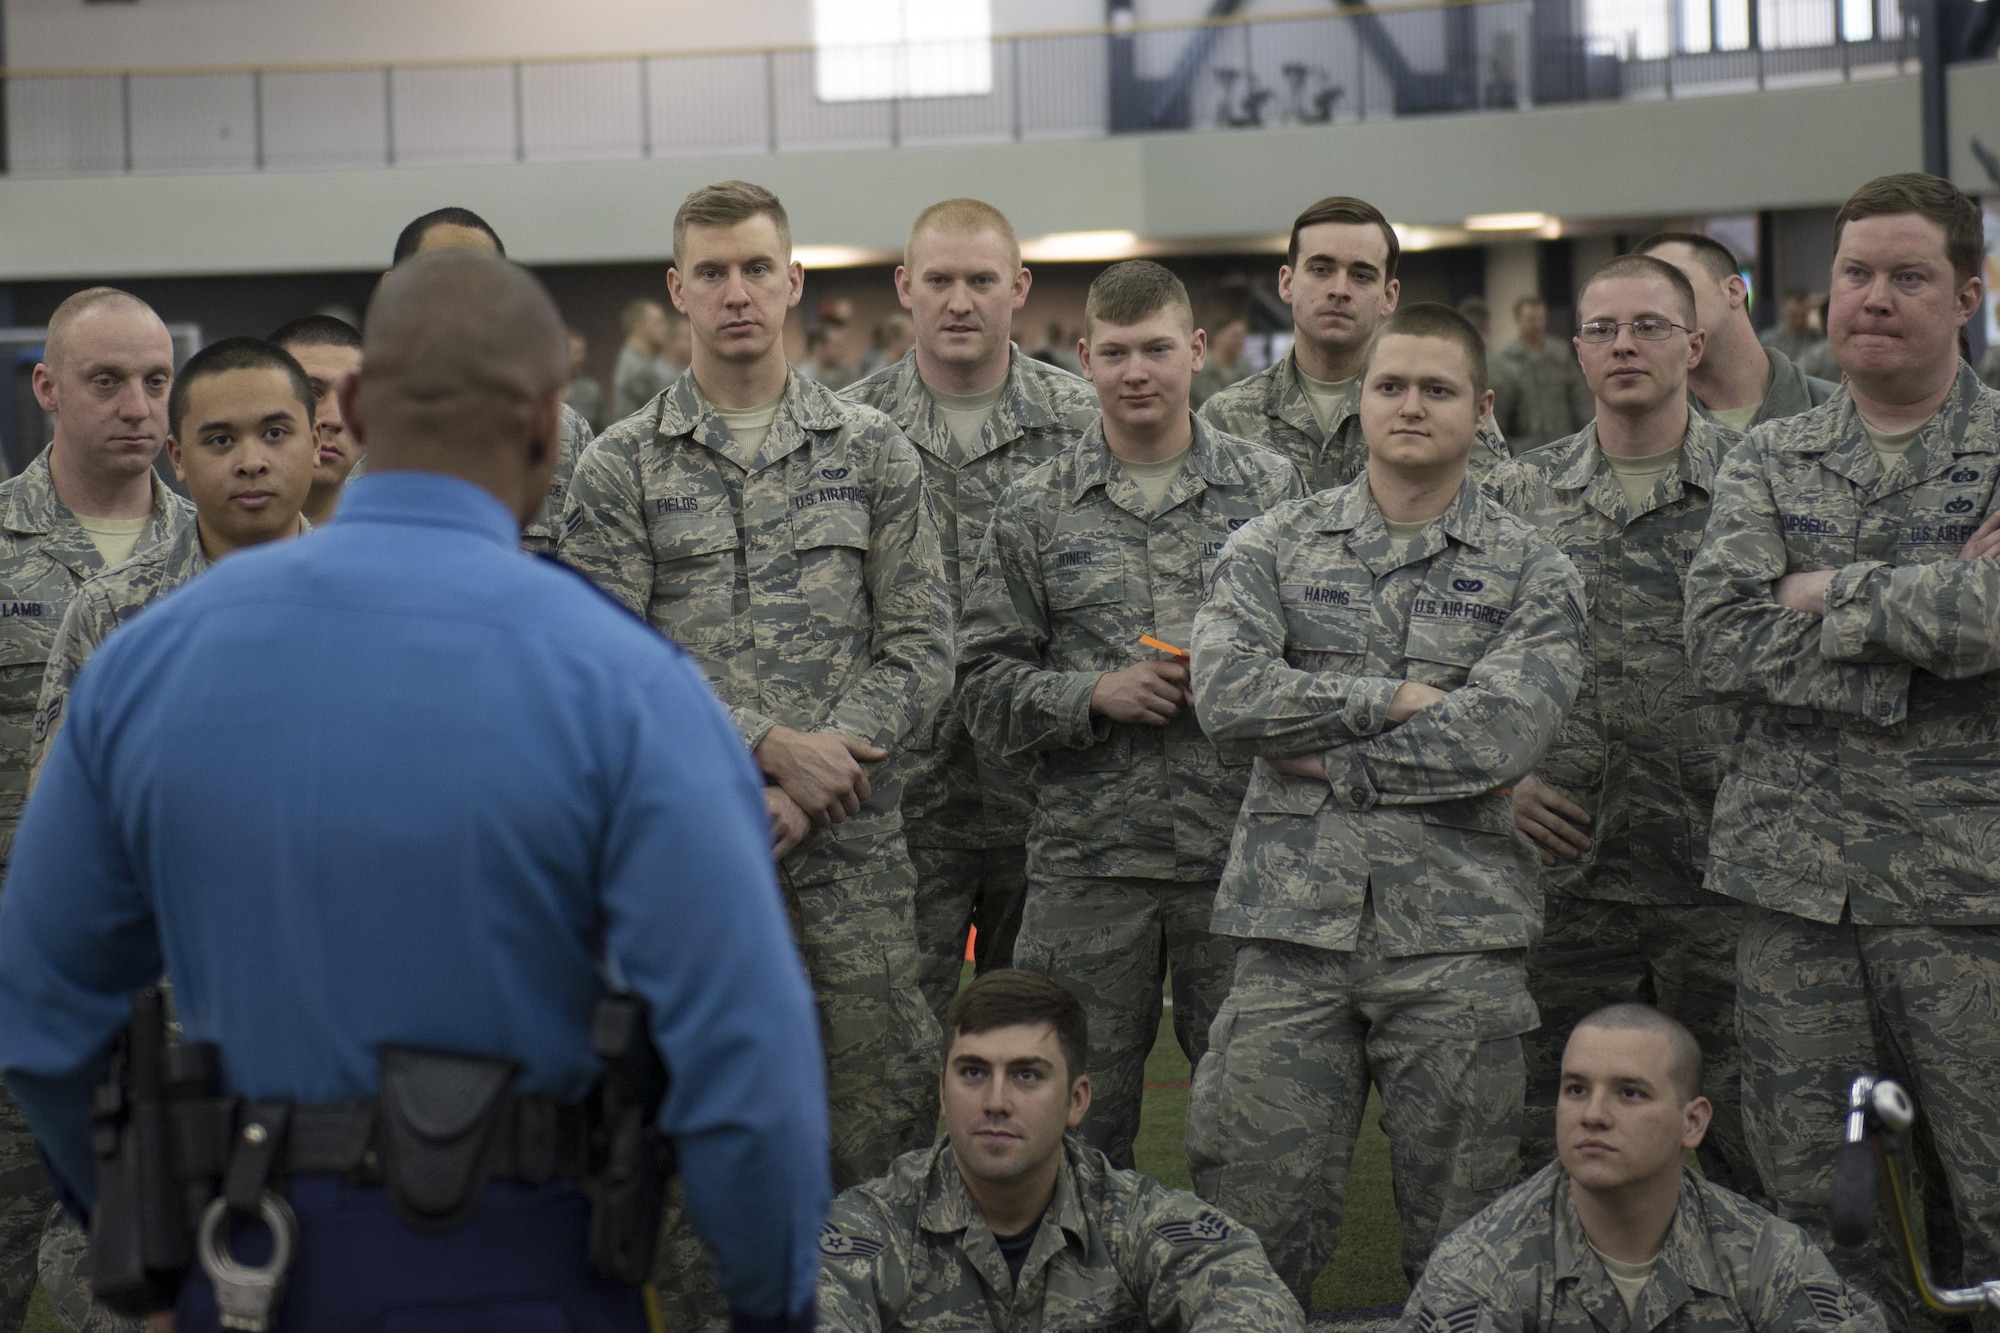 An Alaska State Trooper officer explains the consequences of drinking and driving to members of the 354th Fighter Wing April 8, 2016, on Eielson Air Force Base, Alaska. The event had four stations offering an educational look at the various effects alcohol has on the body and ultimately an Airman’s career. (U.S. Air Force photo by Staff Sgt. Joshua Turner/Released)